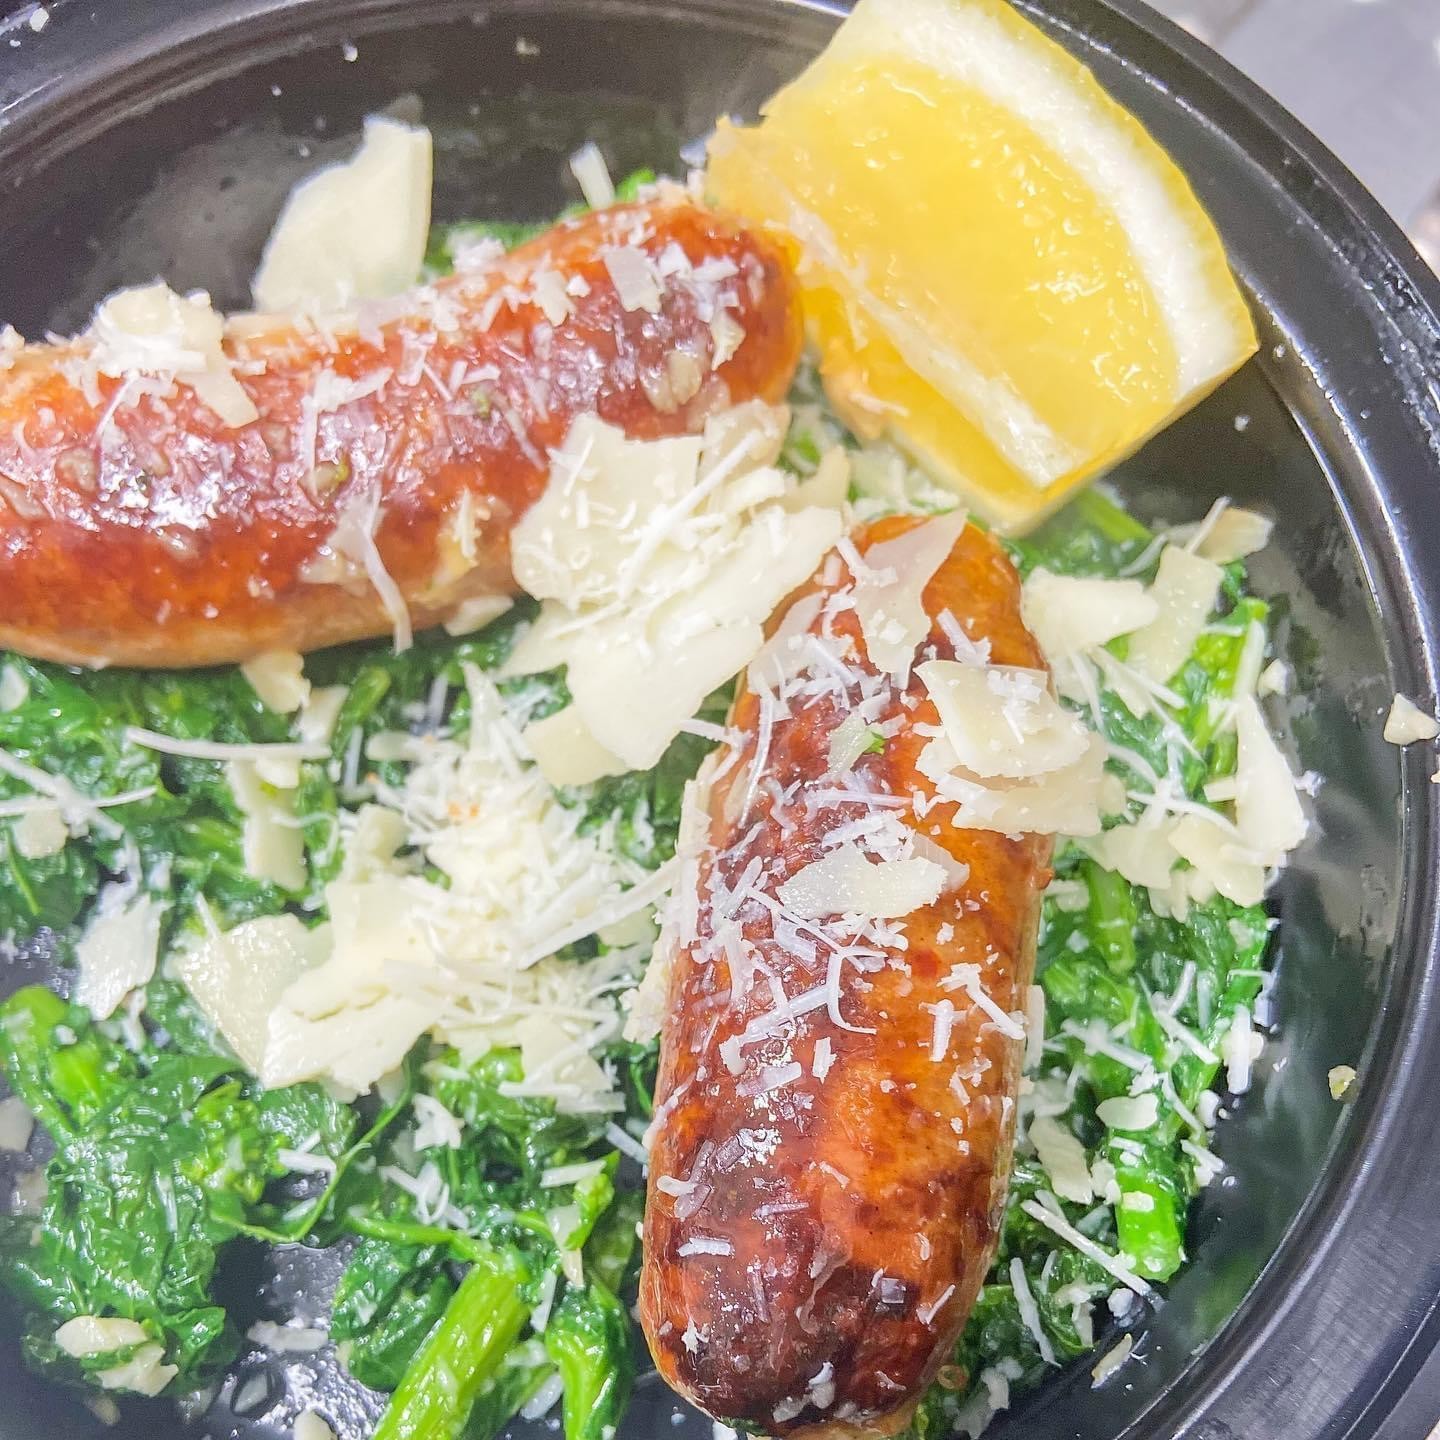 Spicy Sausage and Broccoli Rabe